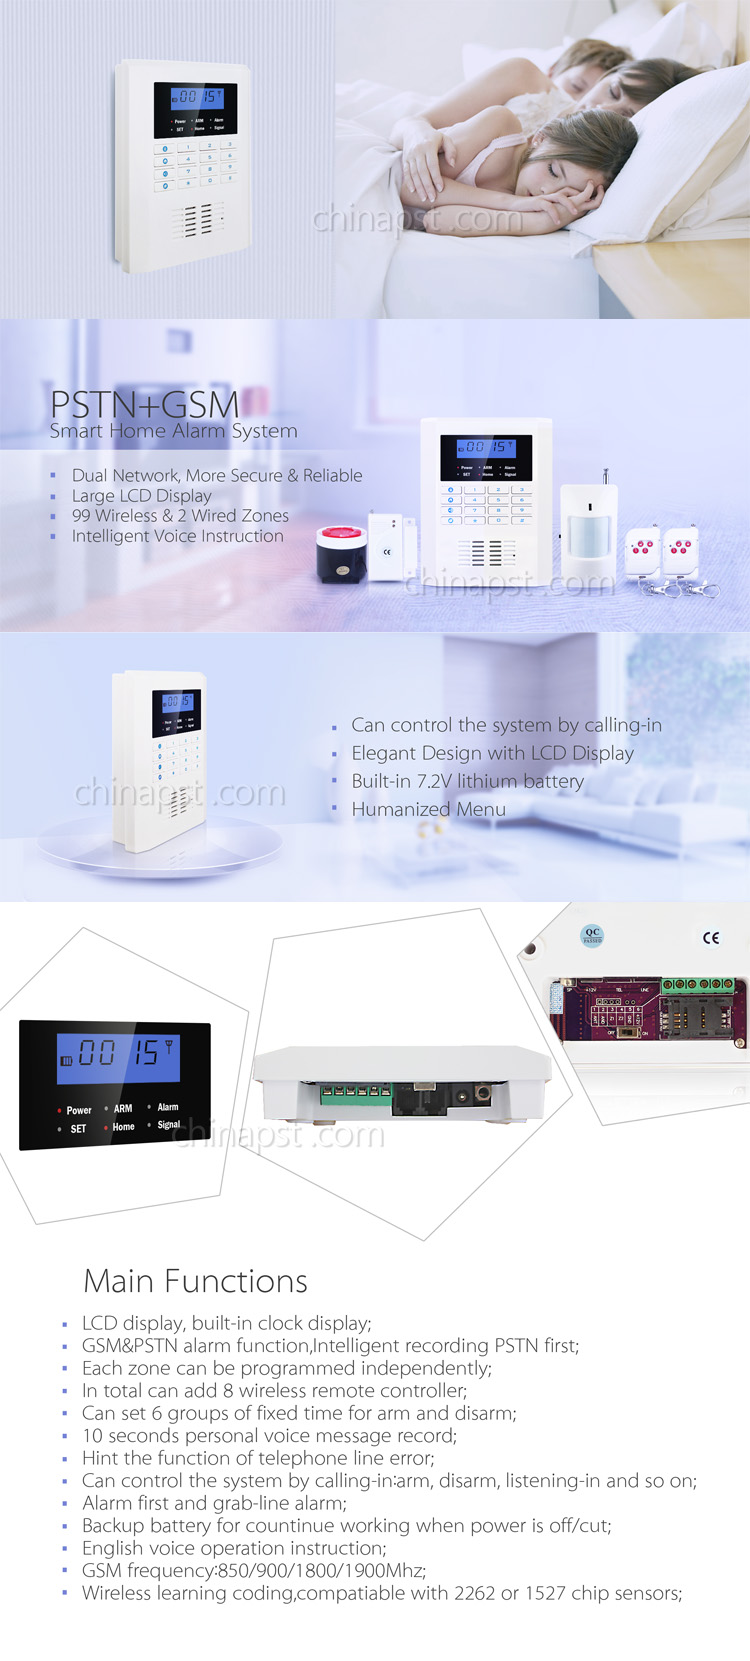 Hot LCD Display GSM PSTN Wireless Home Alarm System (PST-PG992CQ)